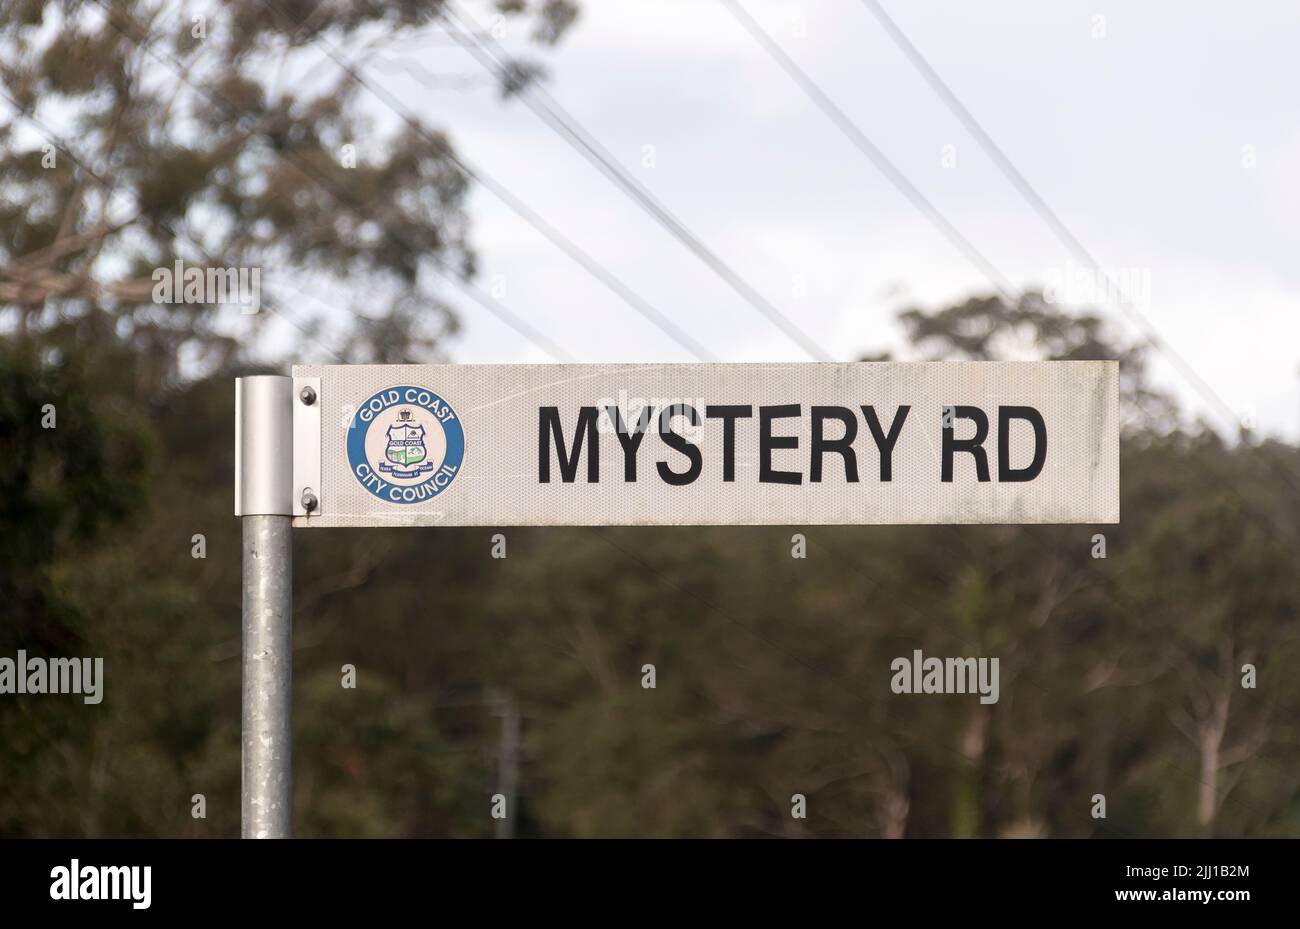 'Mystery Road' road sign in the Gold Coast, Queensland, Australia. Signpost in rural setting. Pre-dates Australian TV drama series Mystery Road. Stock Photo